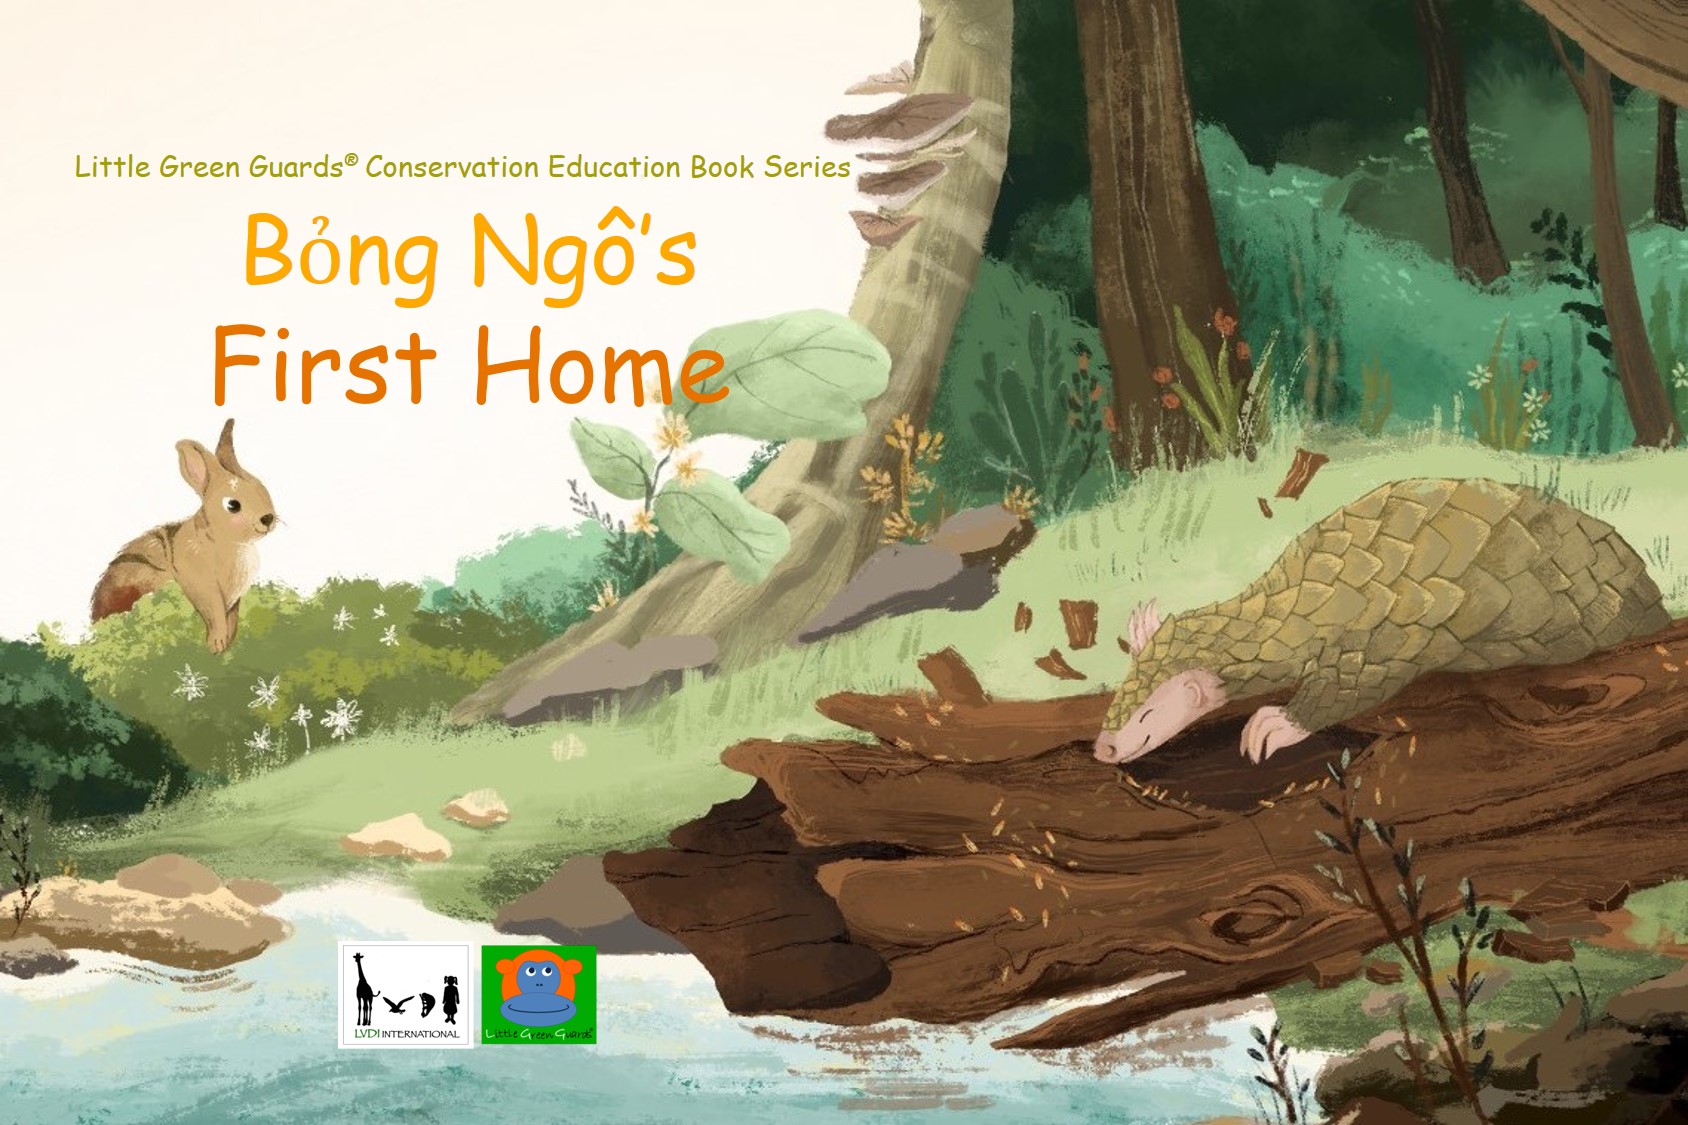 Little Green Guards® Conservation Education Book Series - Bỏng Ngô’s First Home (© LVDI International)